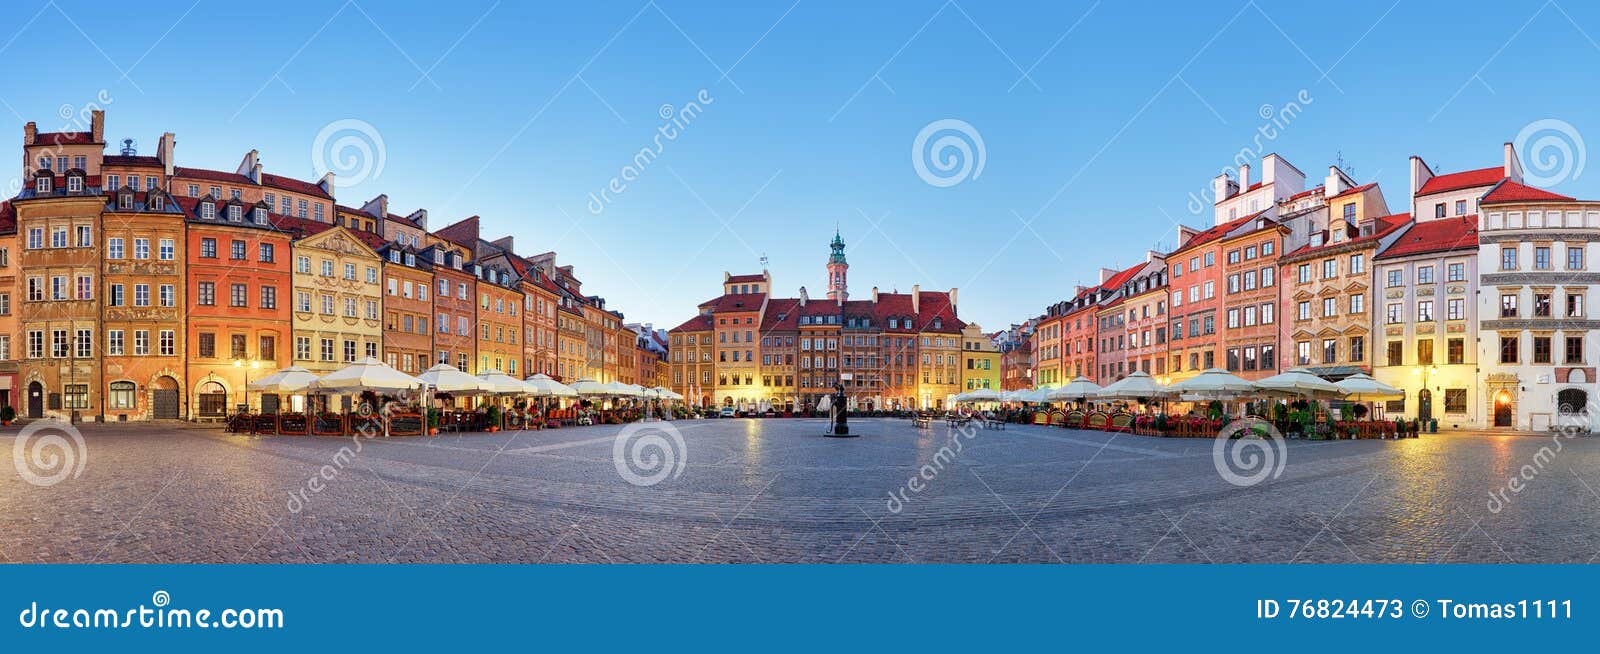 warsaw, old town square at summer, poland, nobody